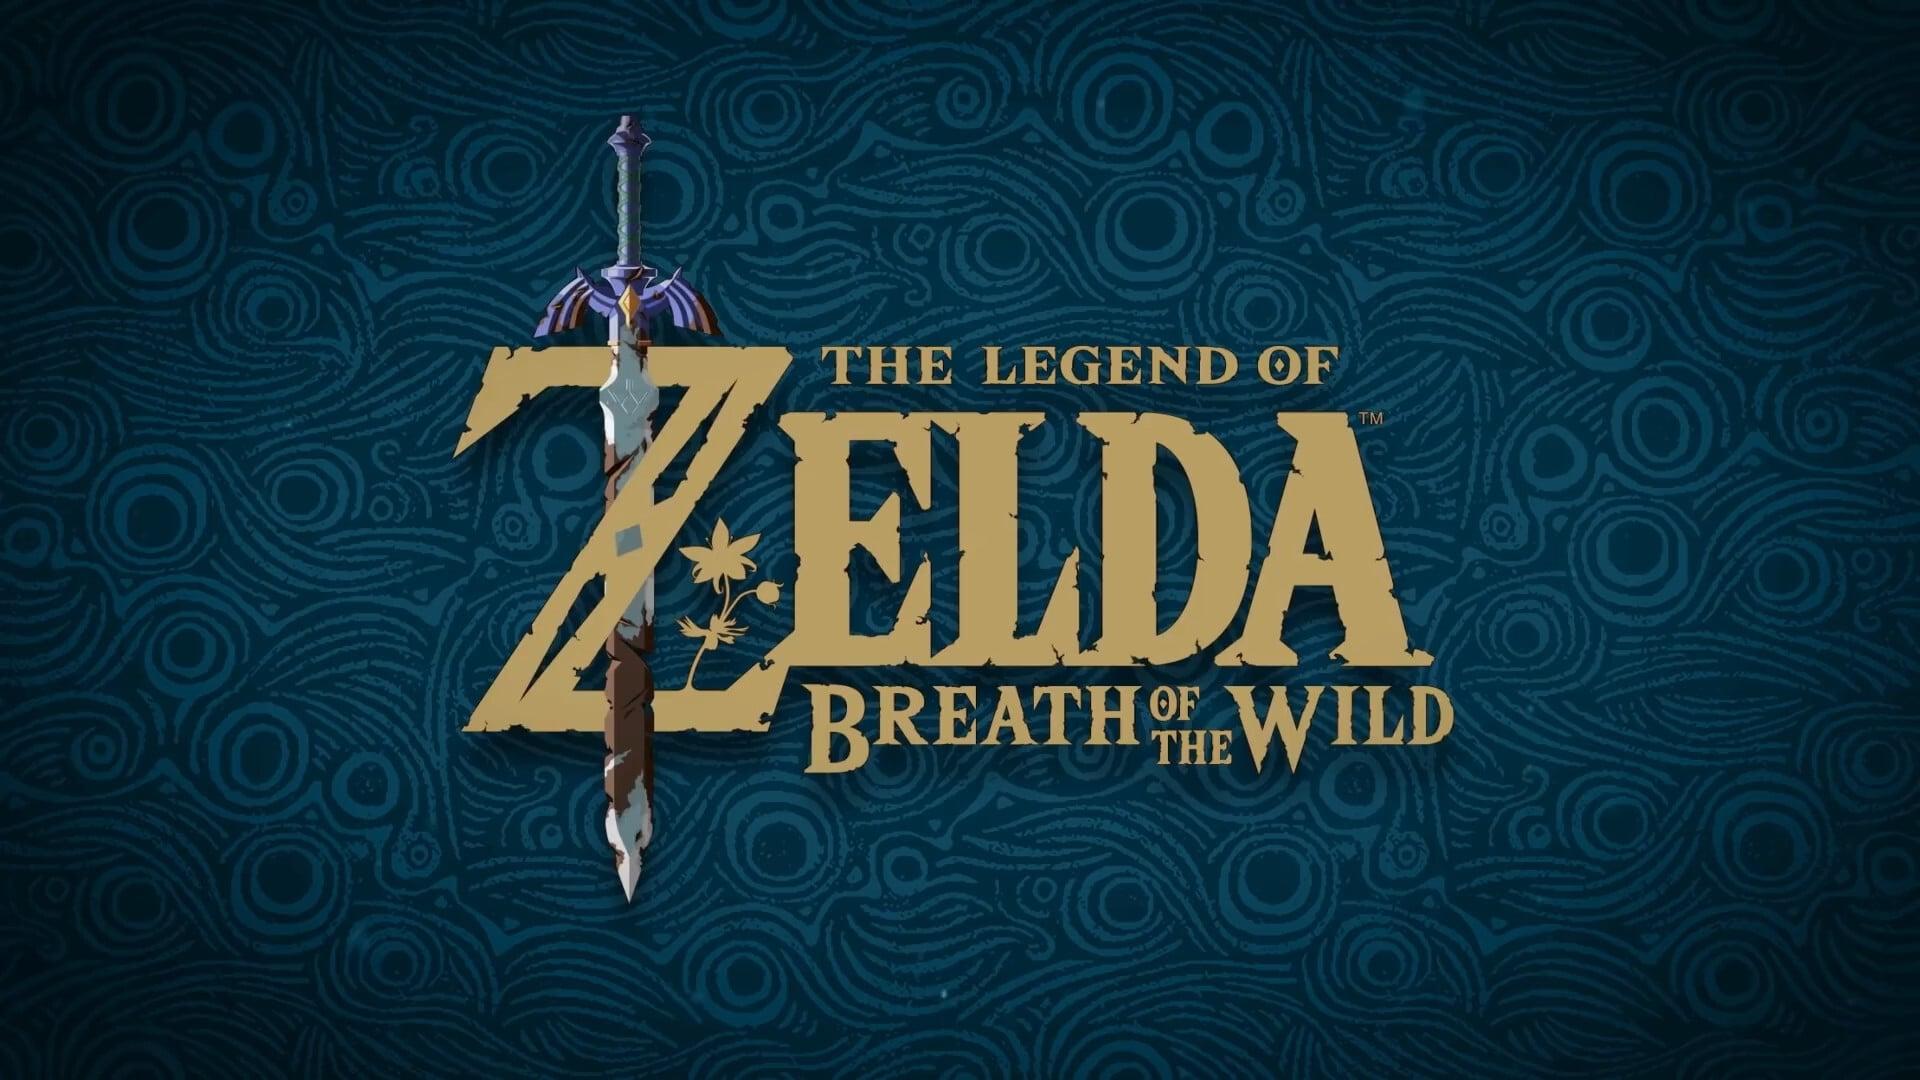 The Making of The Legend of Zelda: Breath of the Wild backdrop